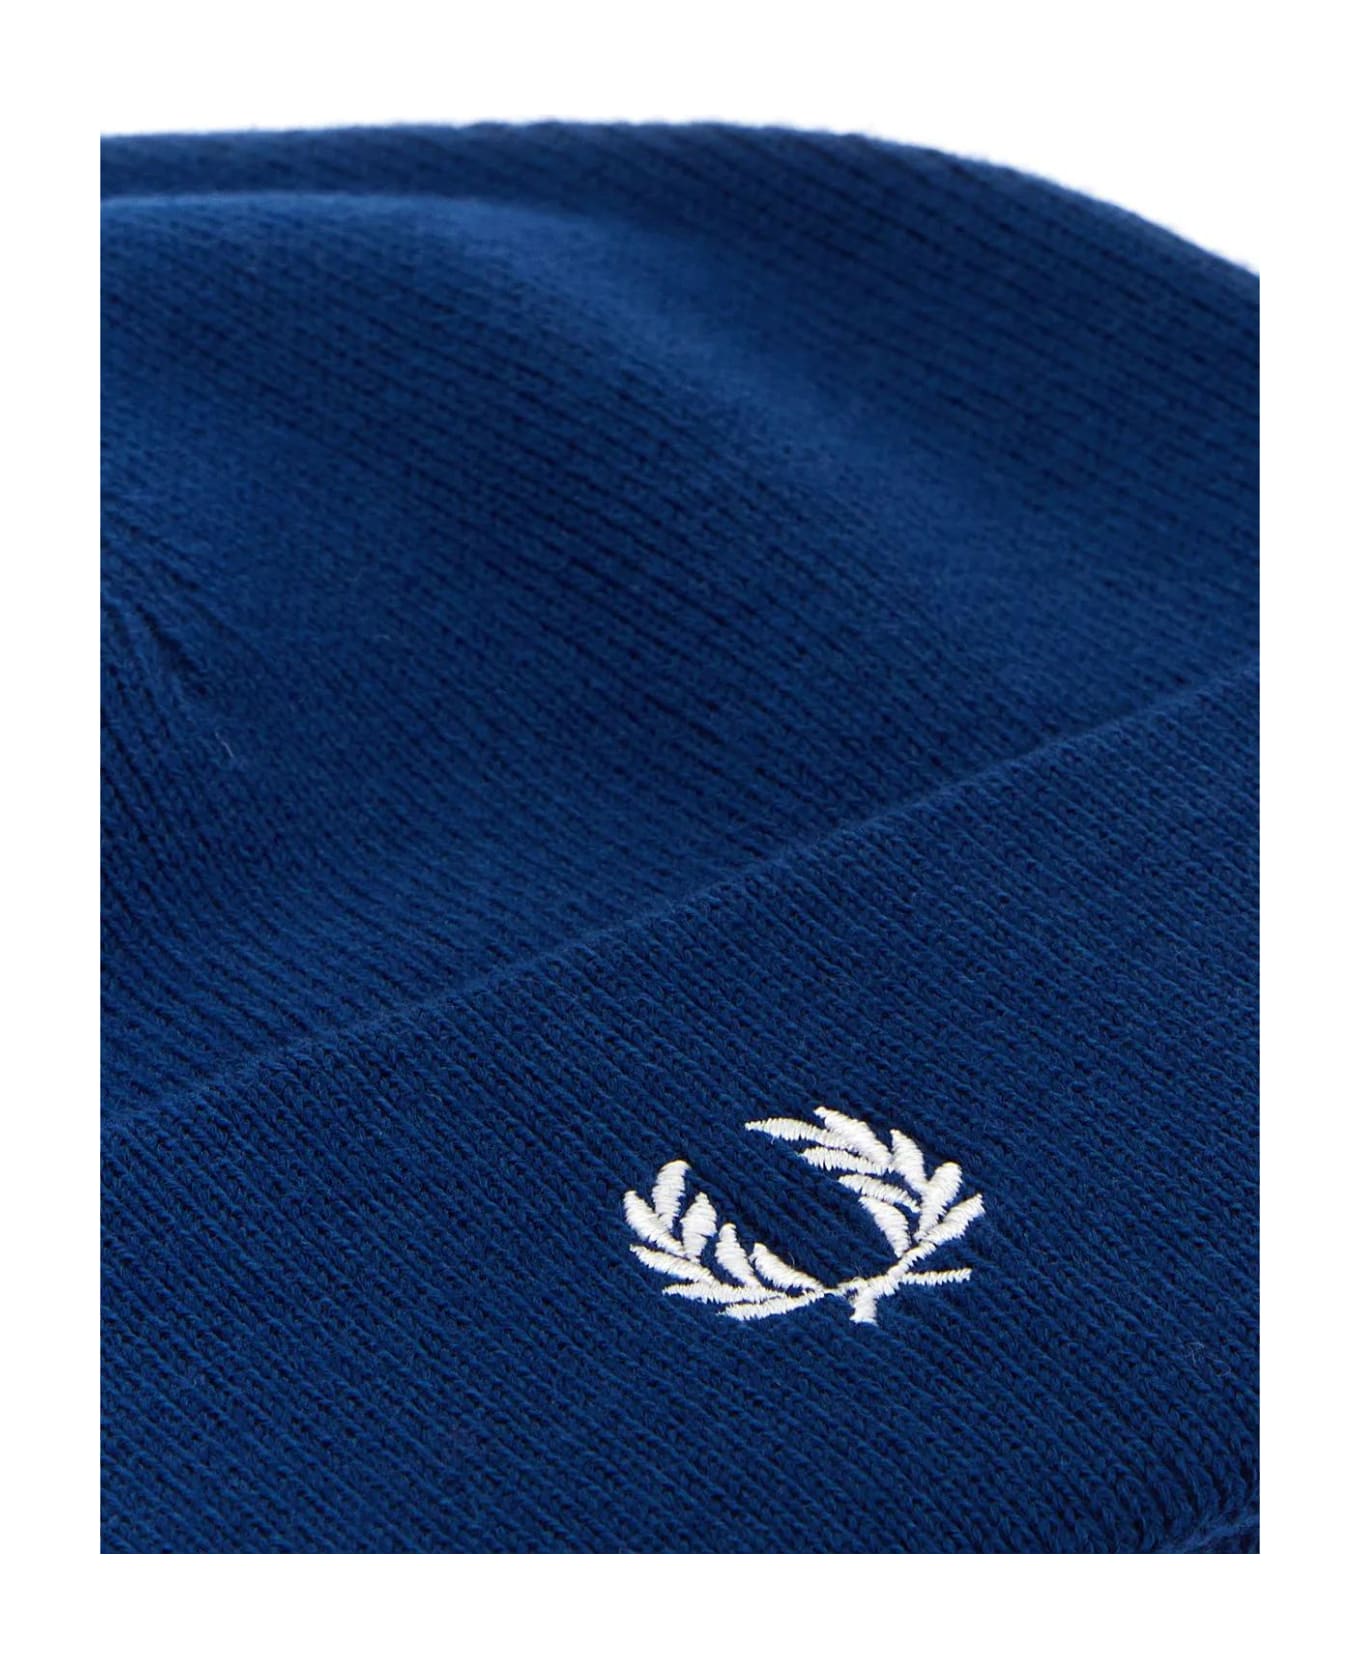 Fred Perry Electric Blue Wool Blend Beanie Hat - BLUE